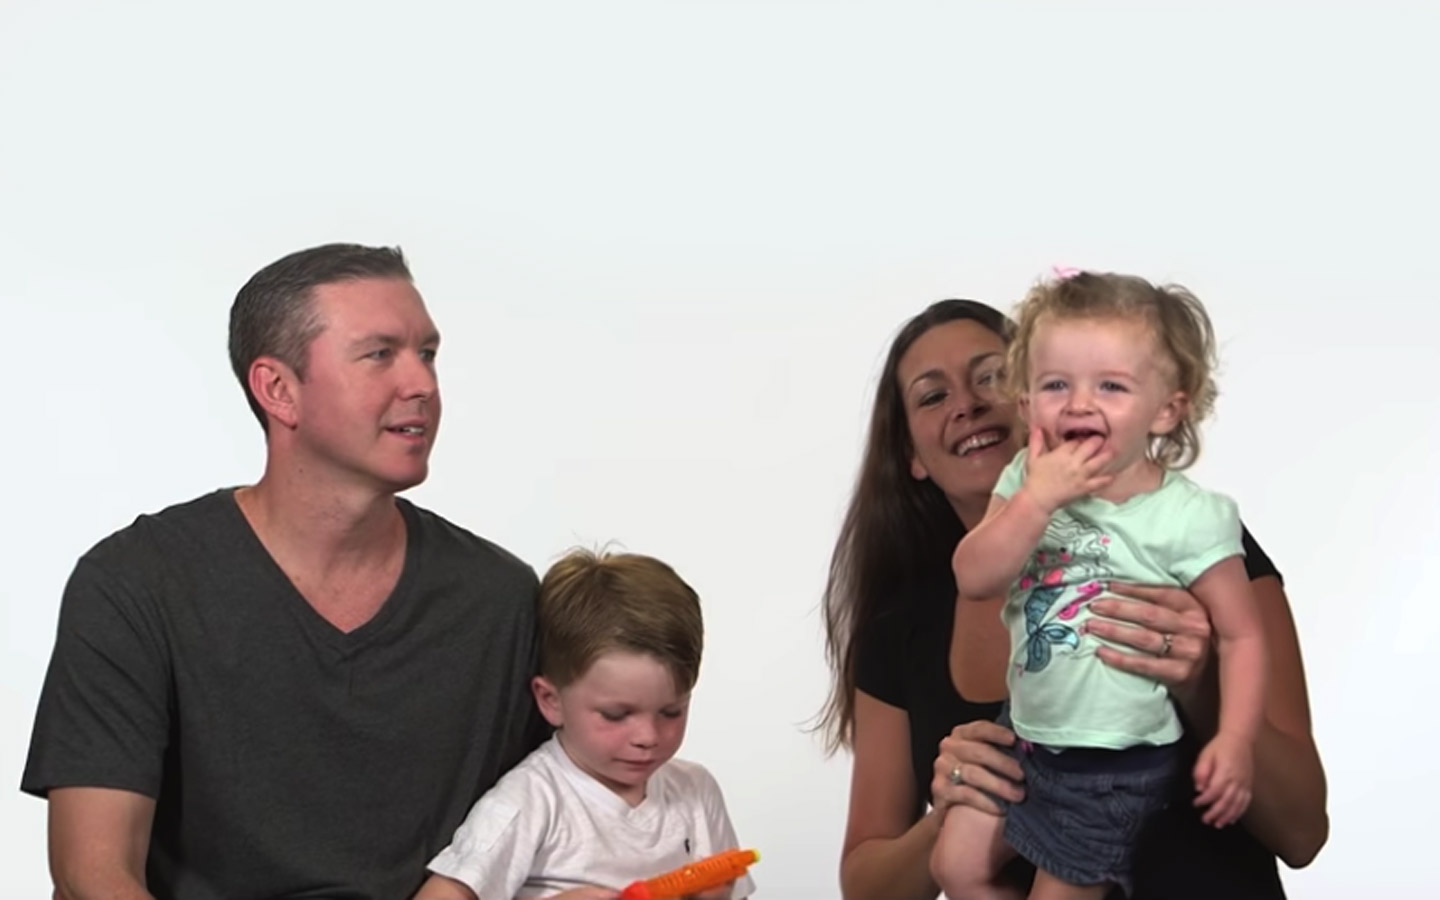 Cochlear recipient Nora and her family